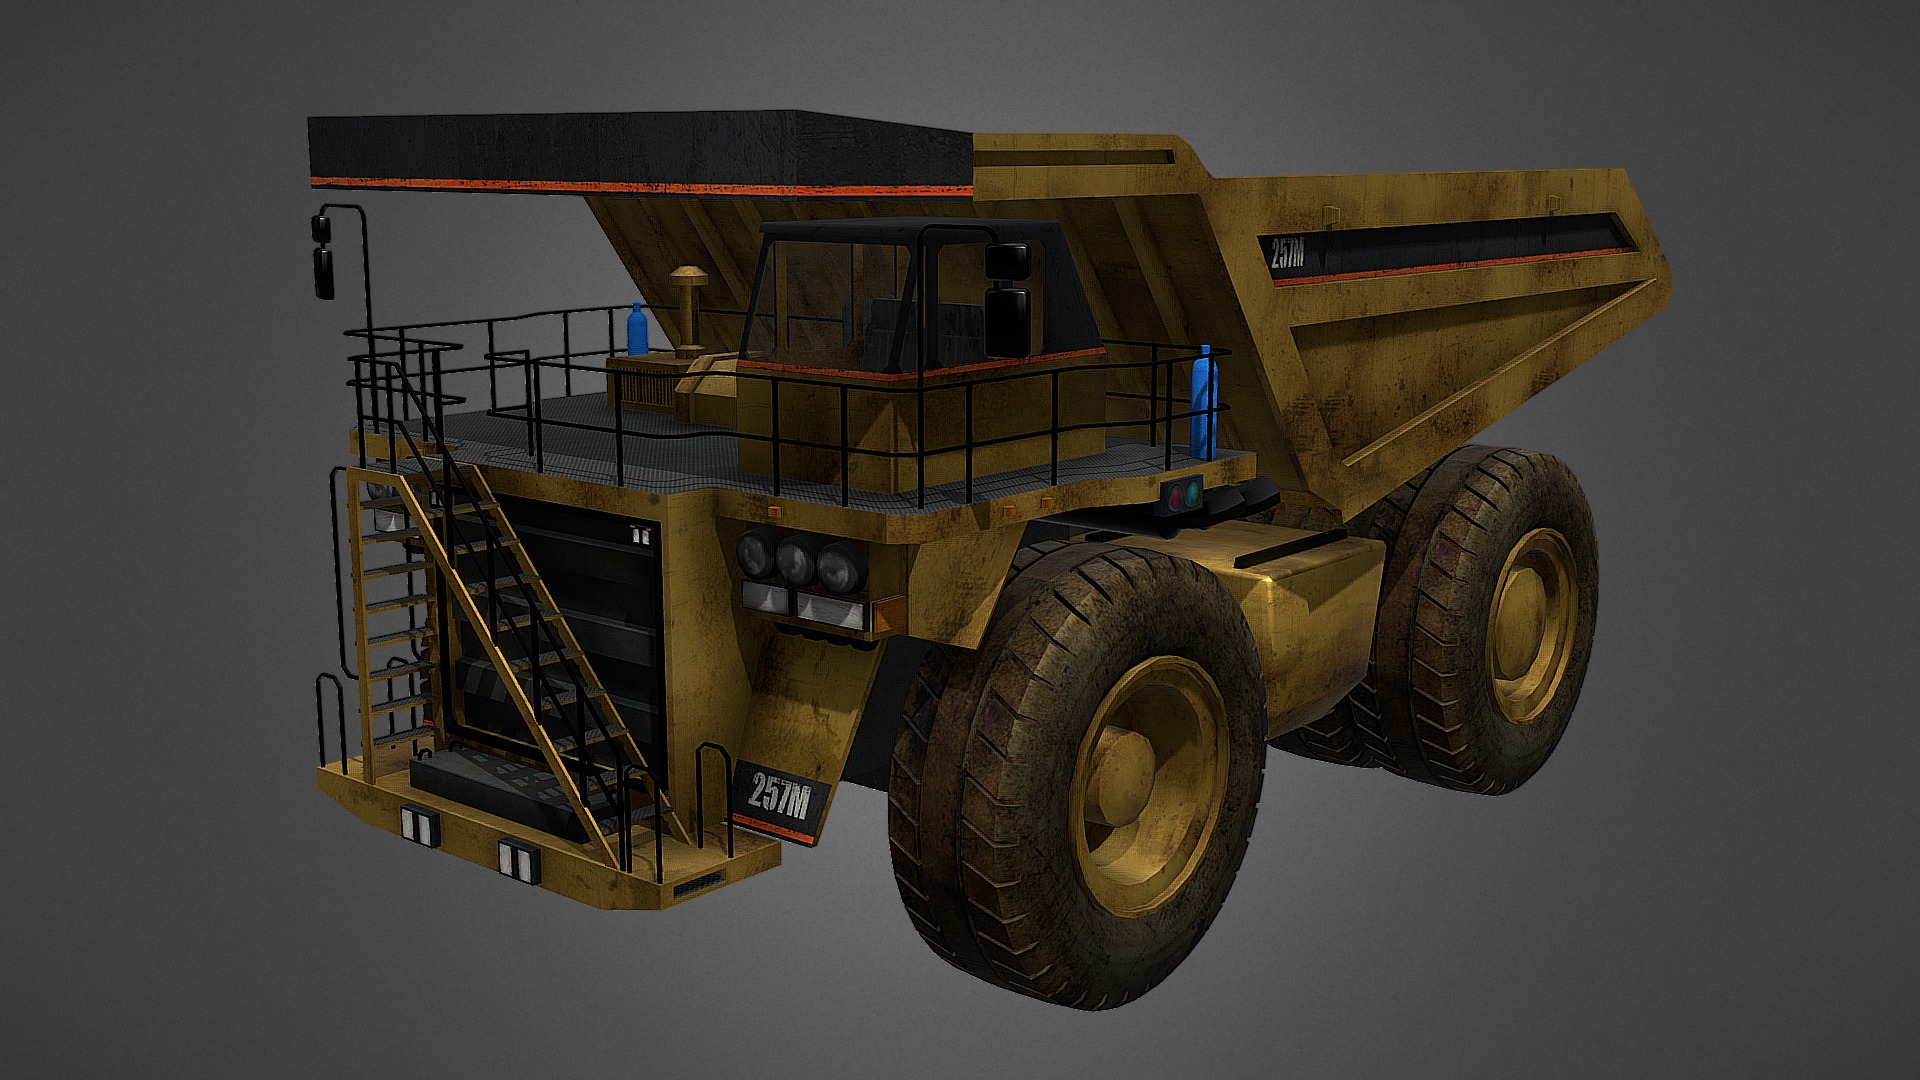 3D model Dumper - This is a 3D model of the Dumper. The 3D model is about a toy tractor on a white background.